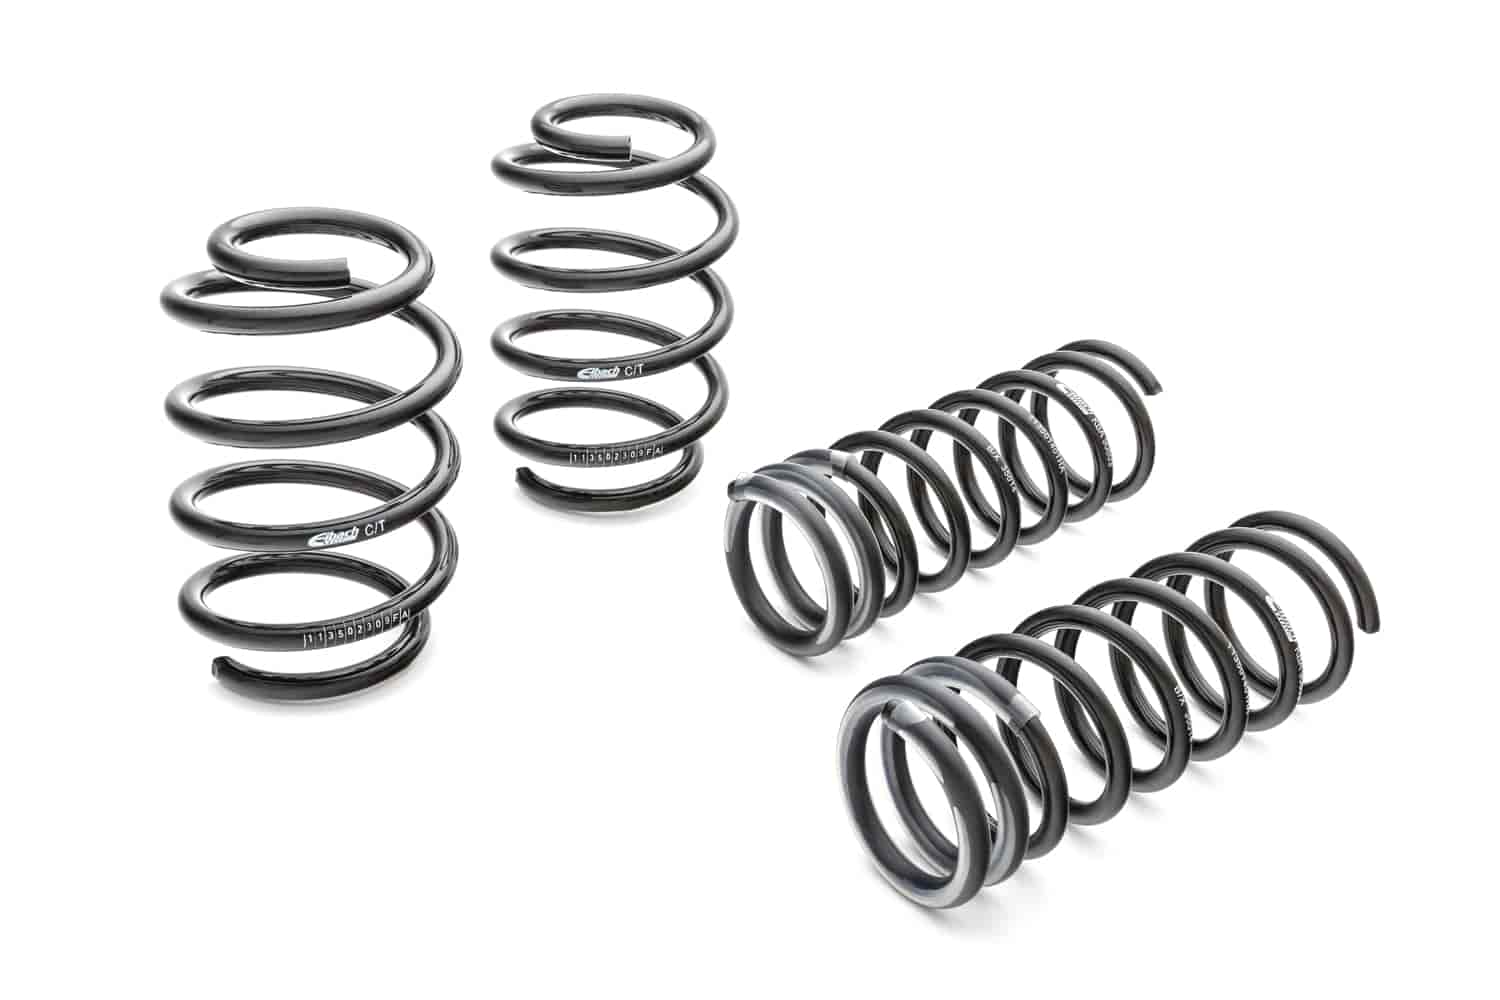 15103.140 Pro-Kit Lowering Springs 2010-2011 Audi S5 Cabriolet - 1 in. Front/.600 in. Rear Drop